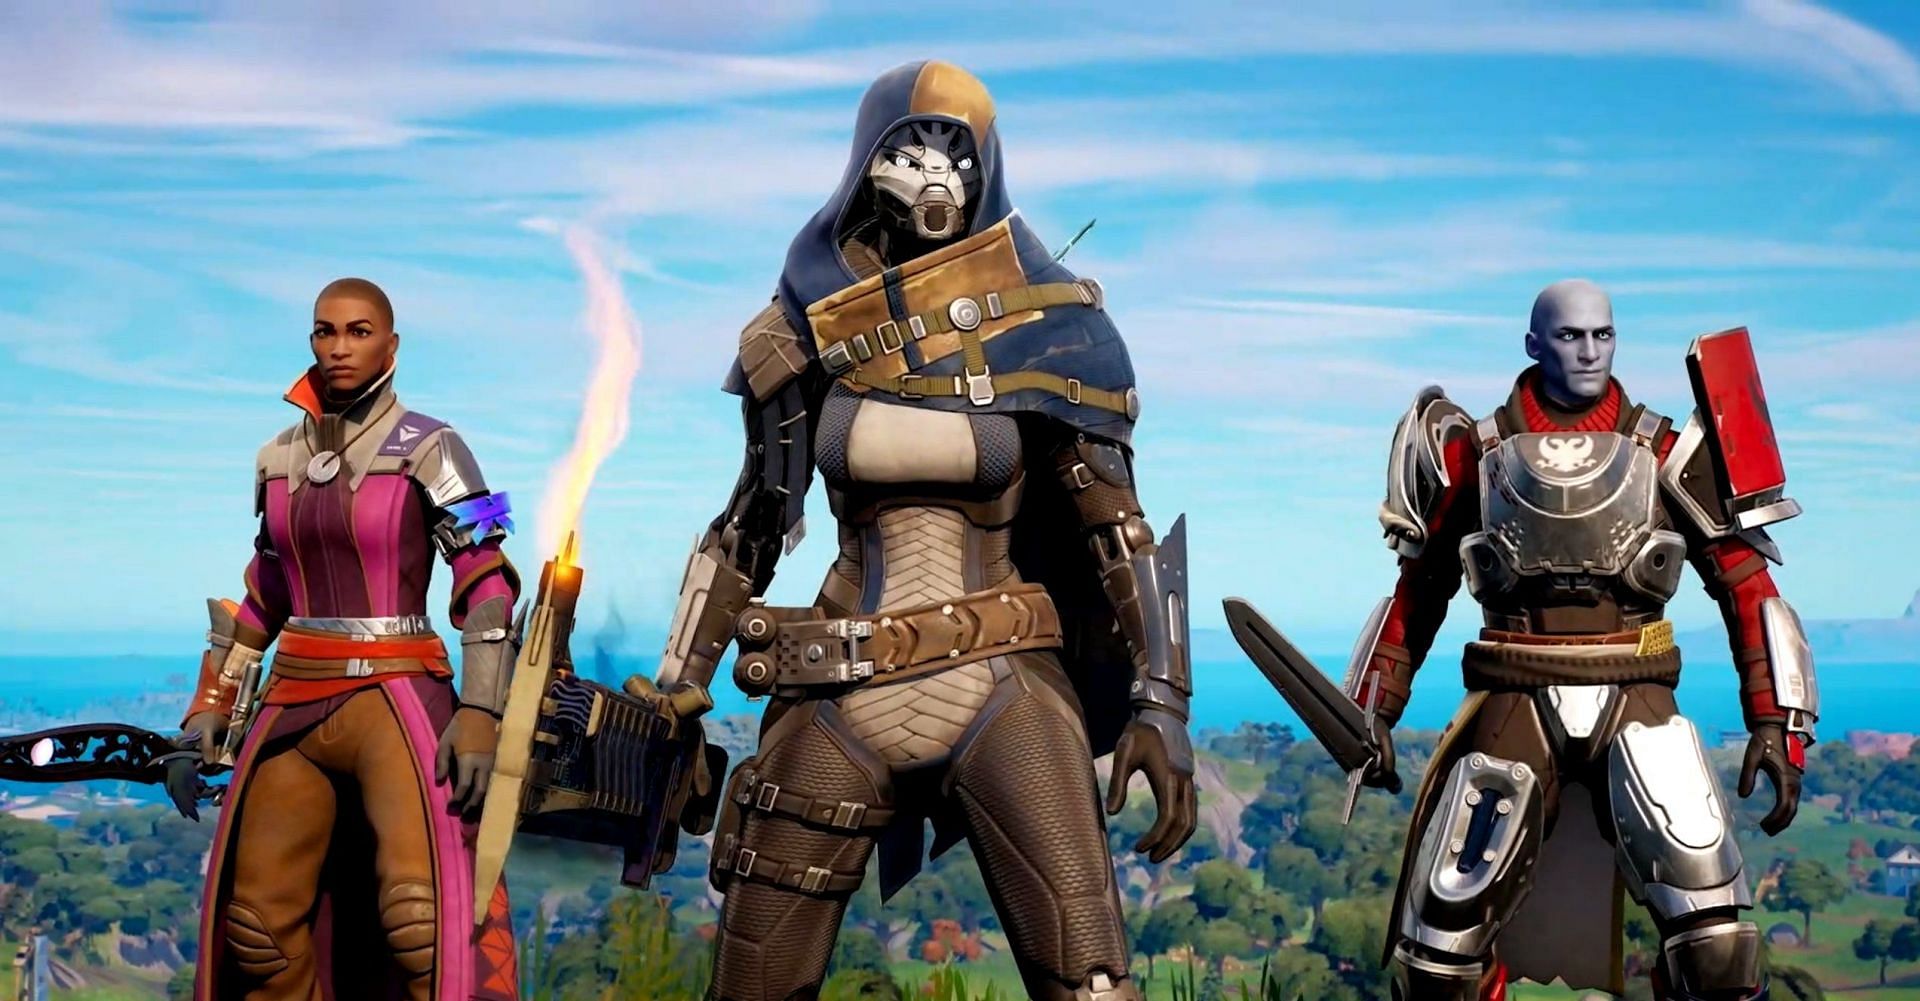 Fortnite x Destiny 2 collaboration has been officially confirmed and revealed (Image via Epic Games)